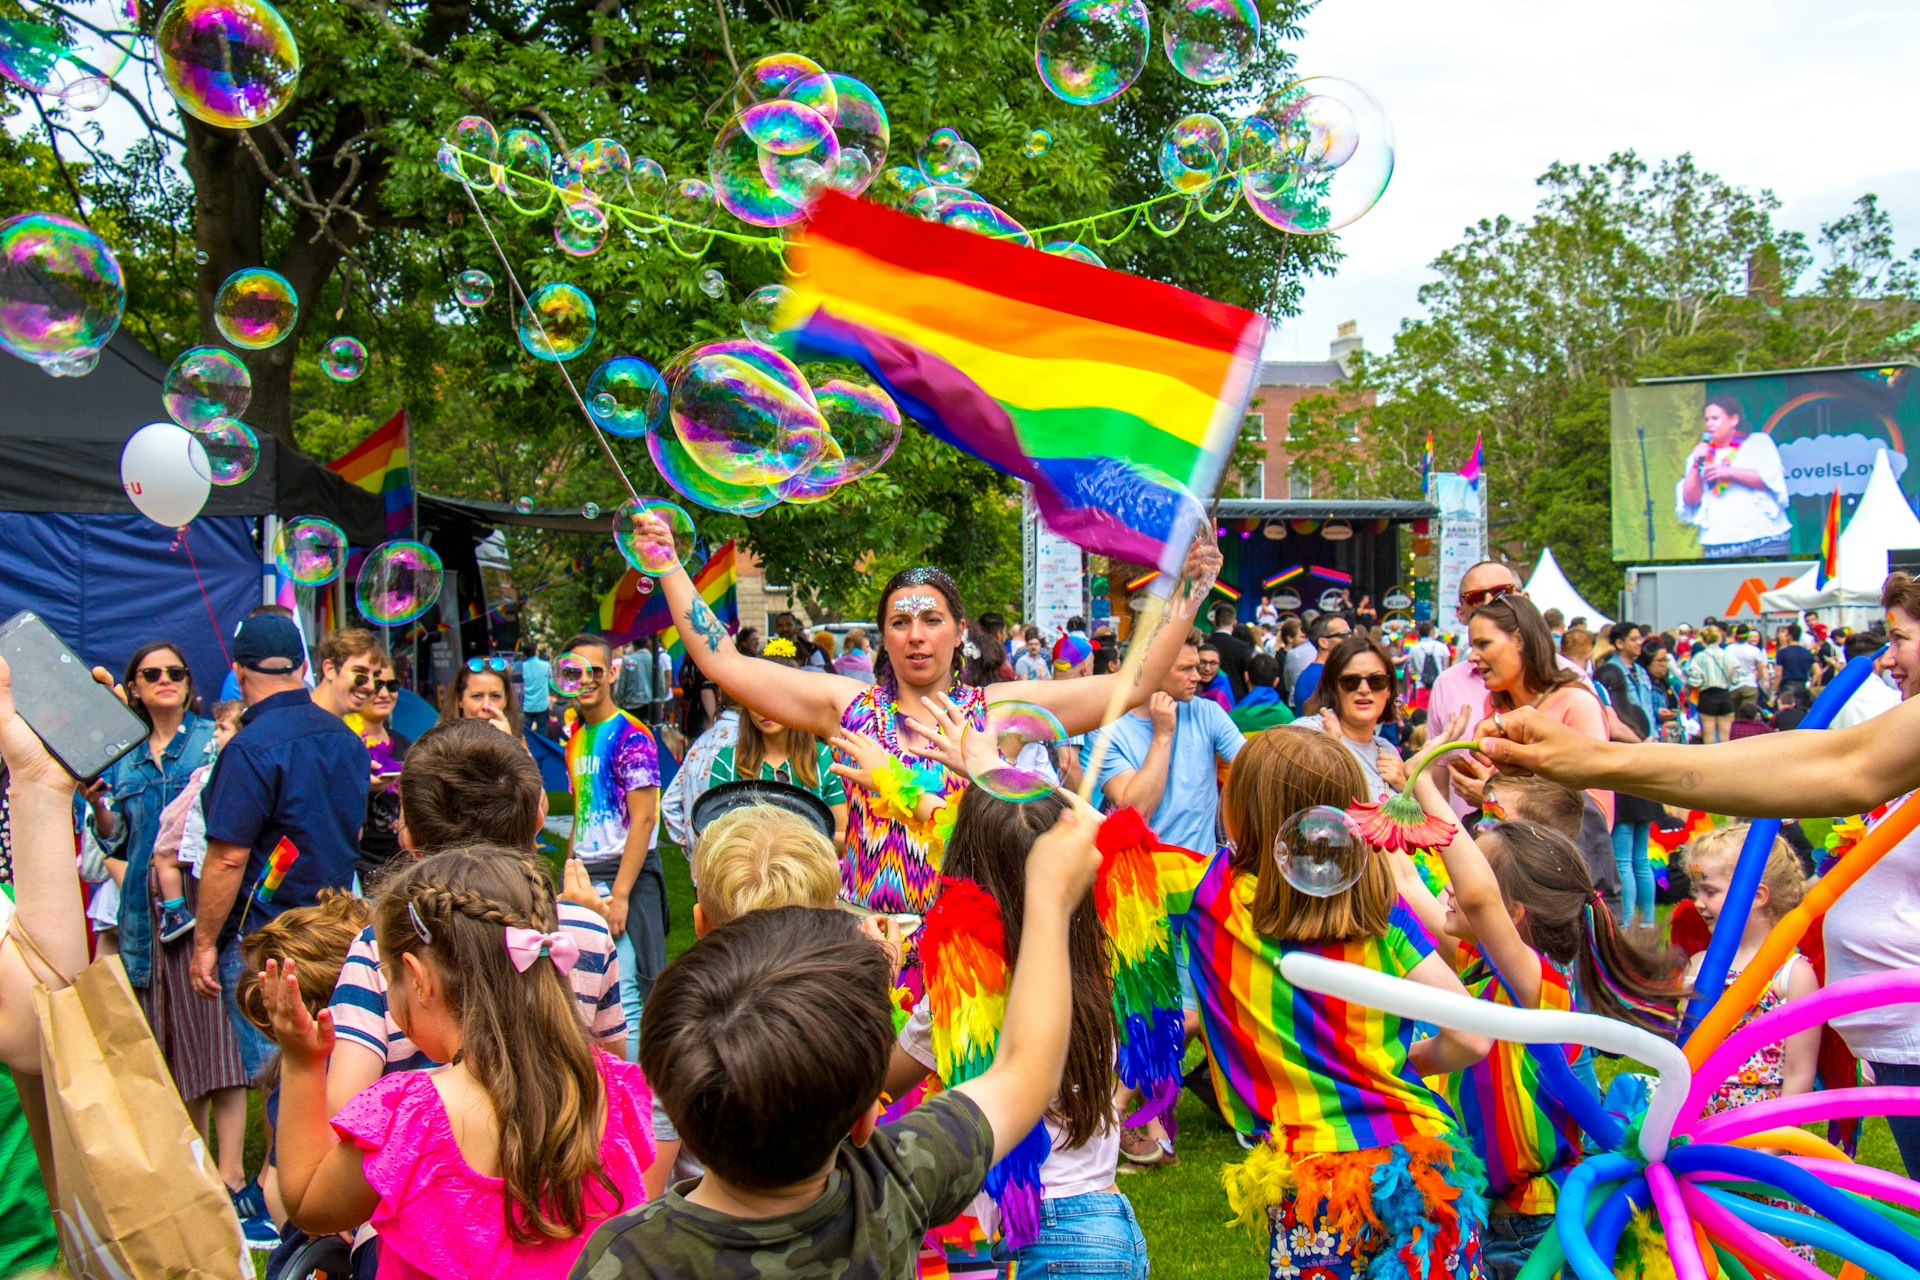 A mixed group of revelers including adults and children dressed in rainbow colors celebrate Pride Festival in Dublin in June, flying flags and blowing bubbles